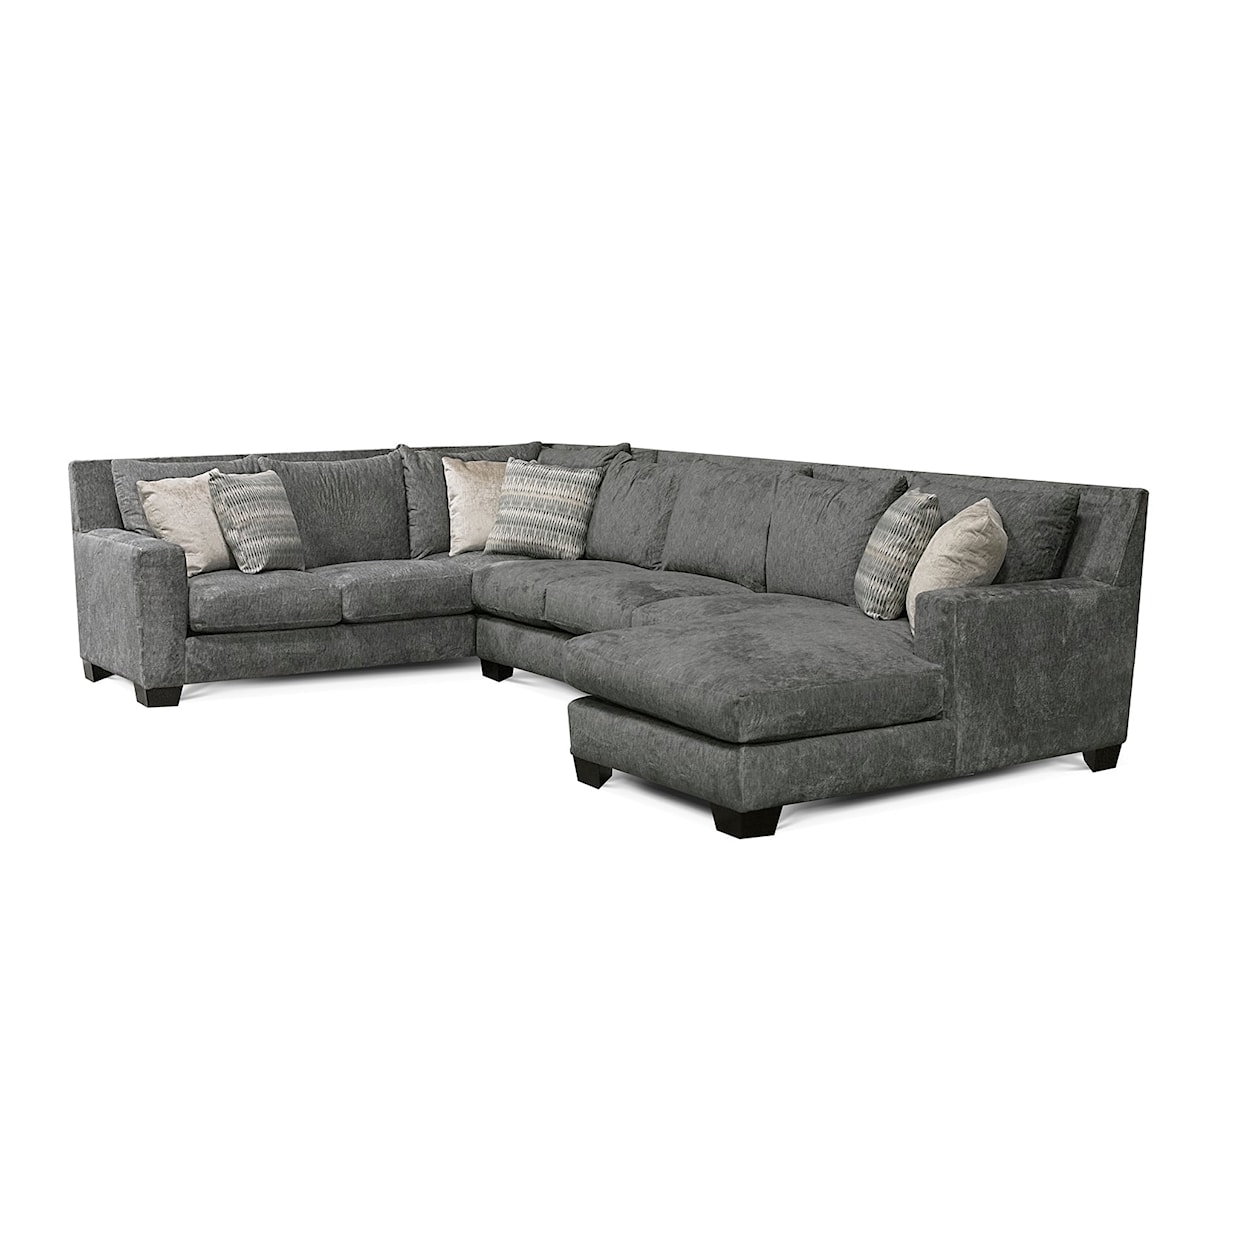 England 7K00/N Series Sectional Sofa with Chaise